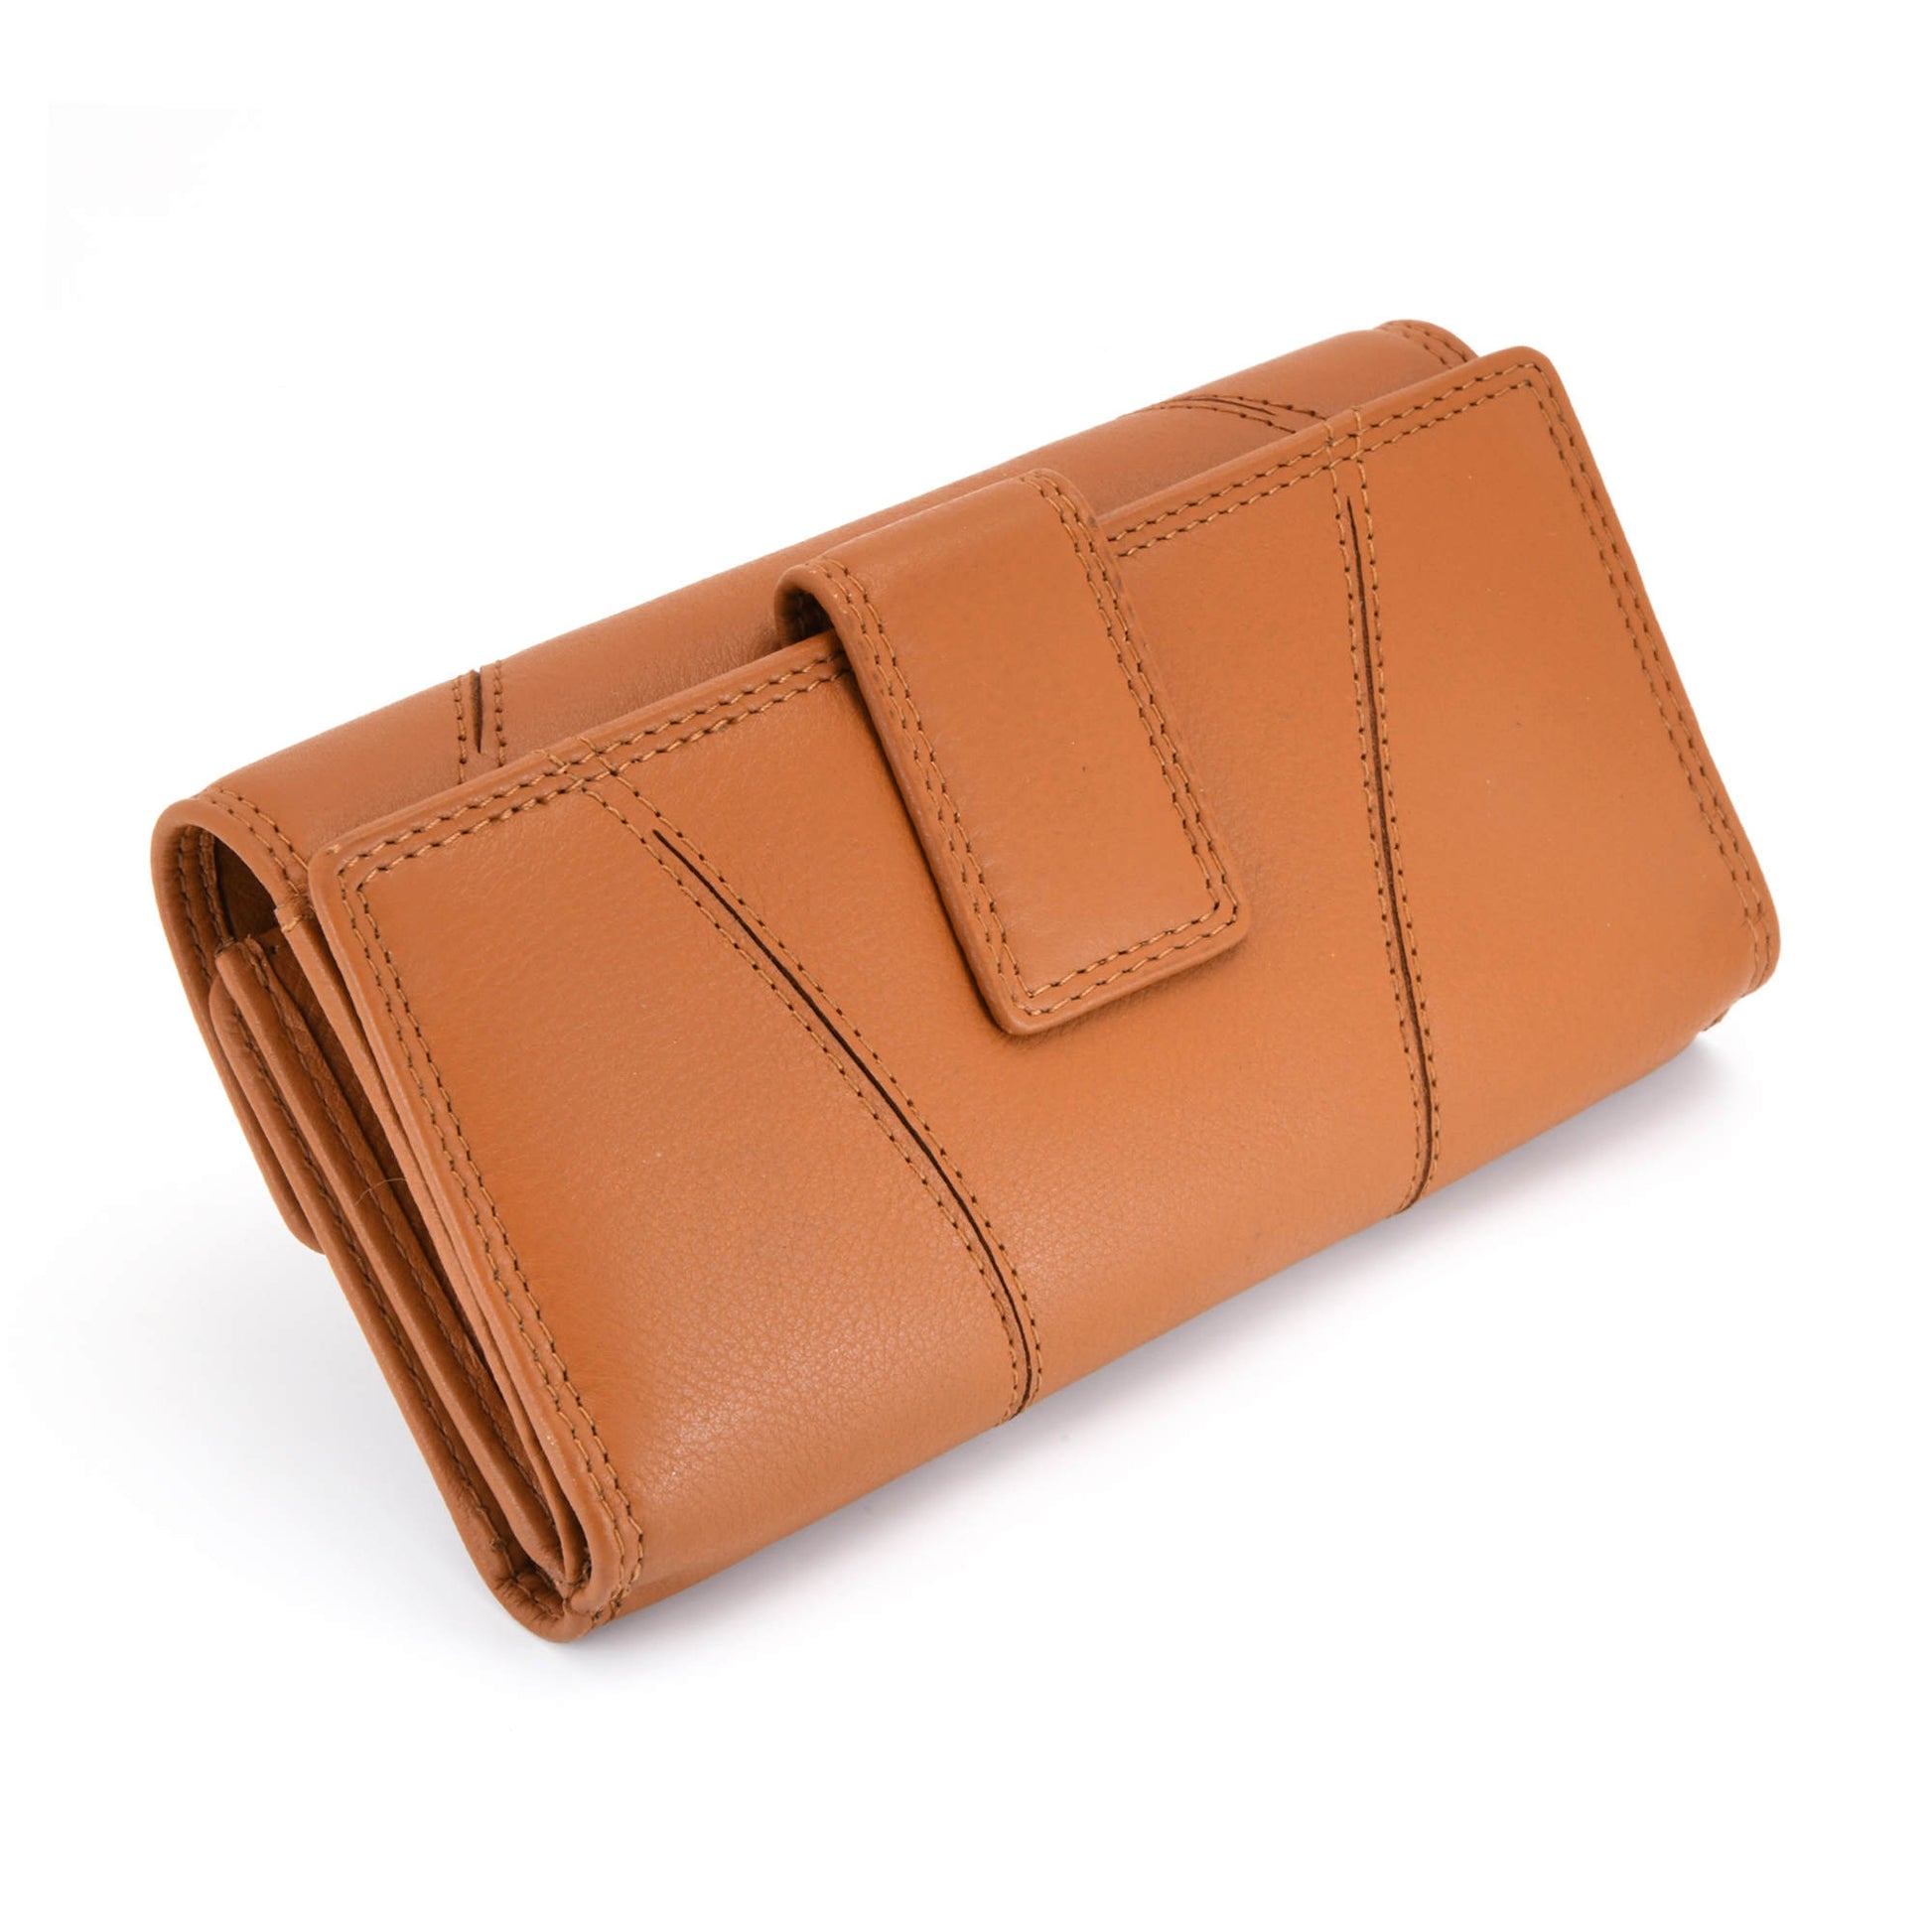 Style n Craft 300954-CG Clutch Wallet for Ladies in Cow Leather - Tan Color - Back Closed Angled View